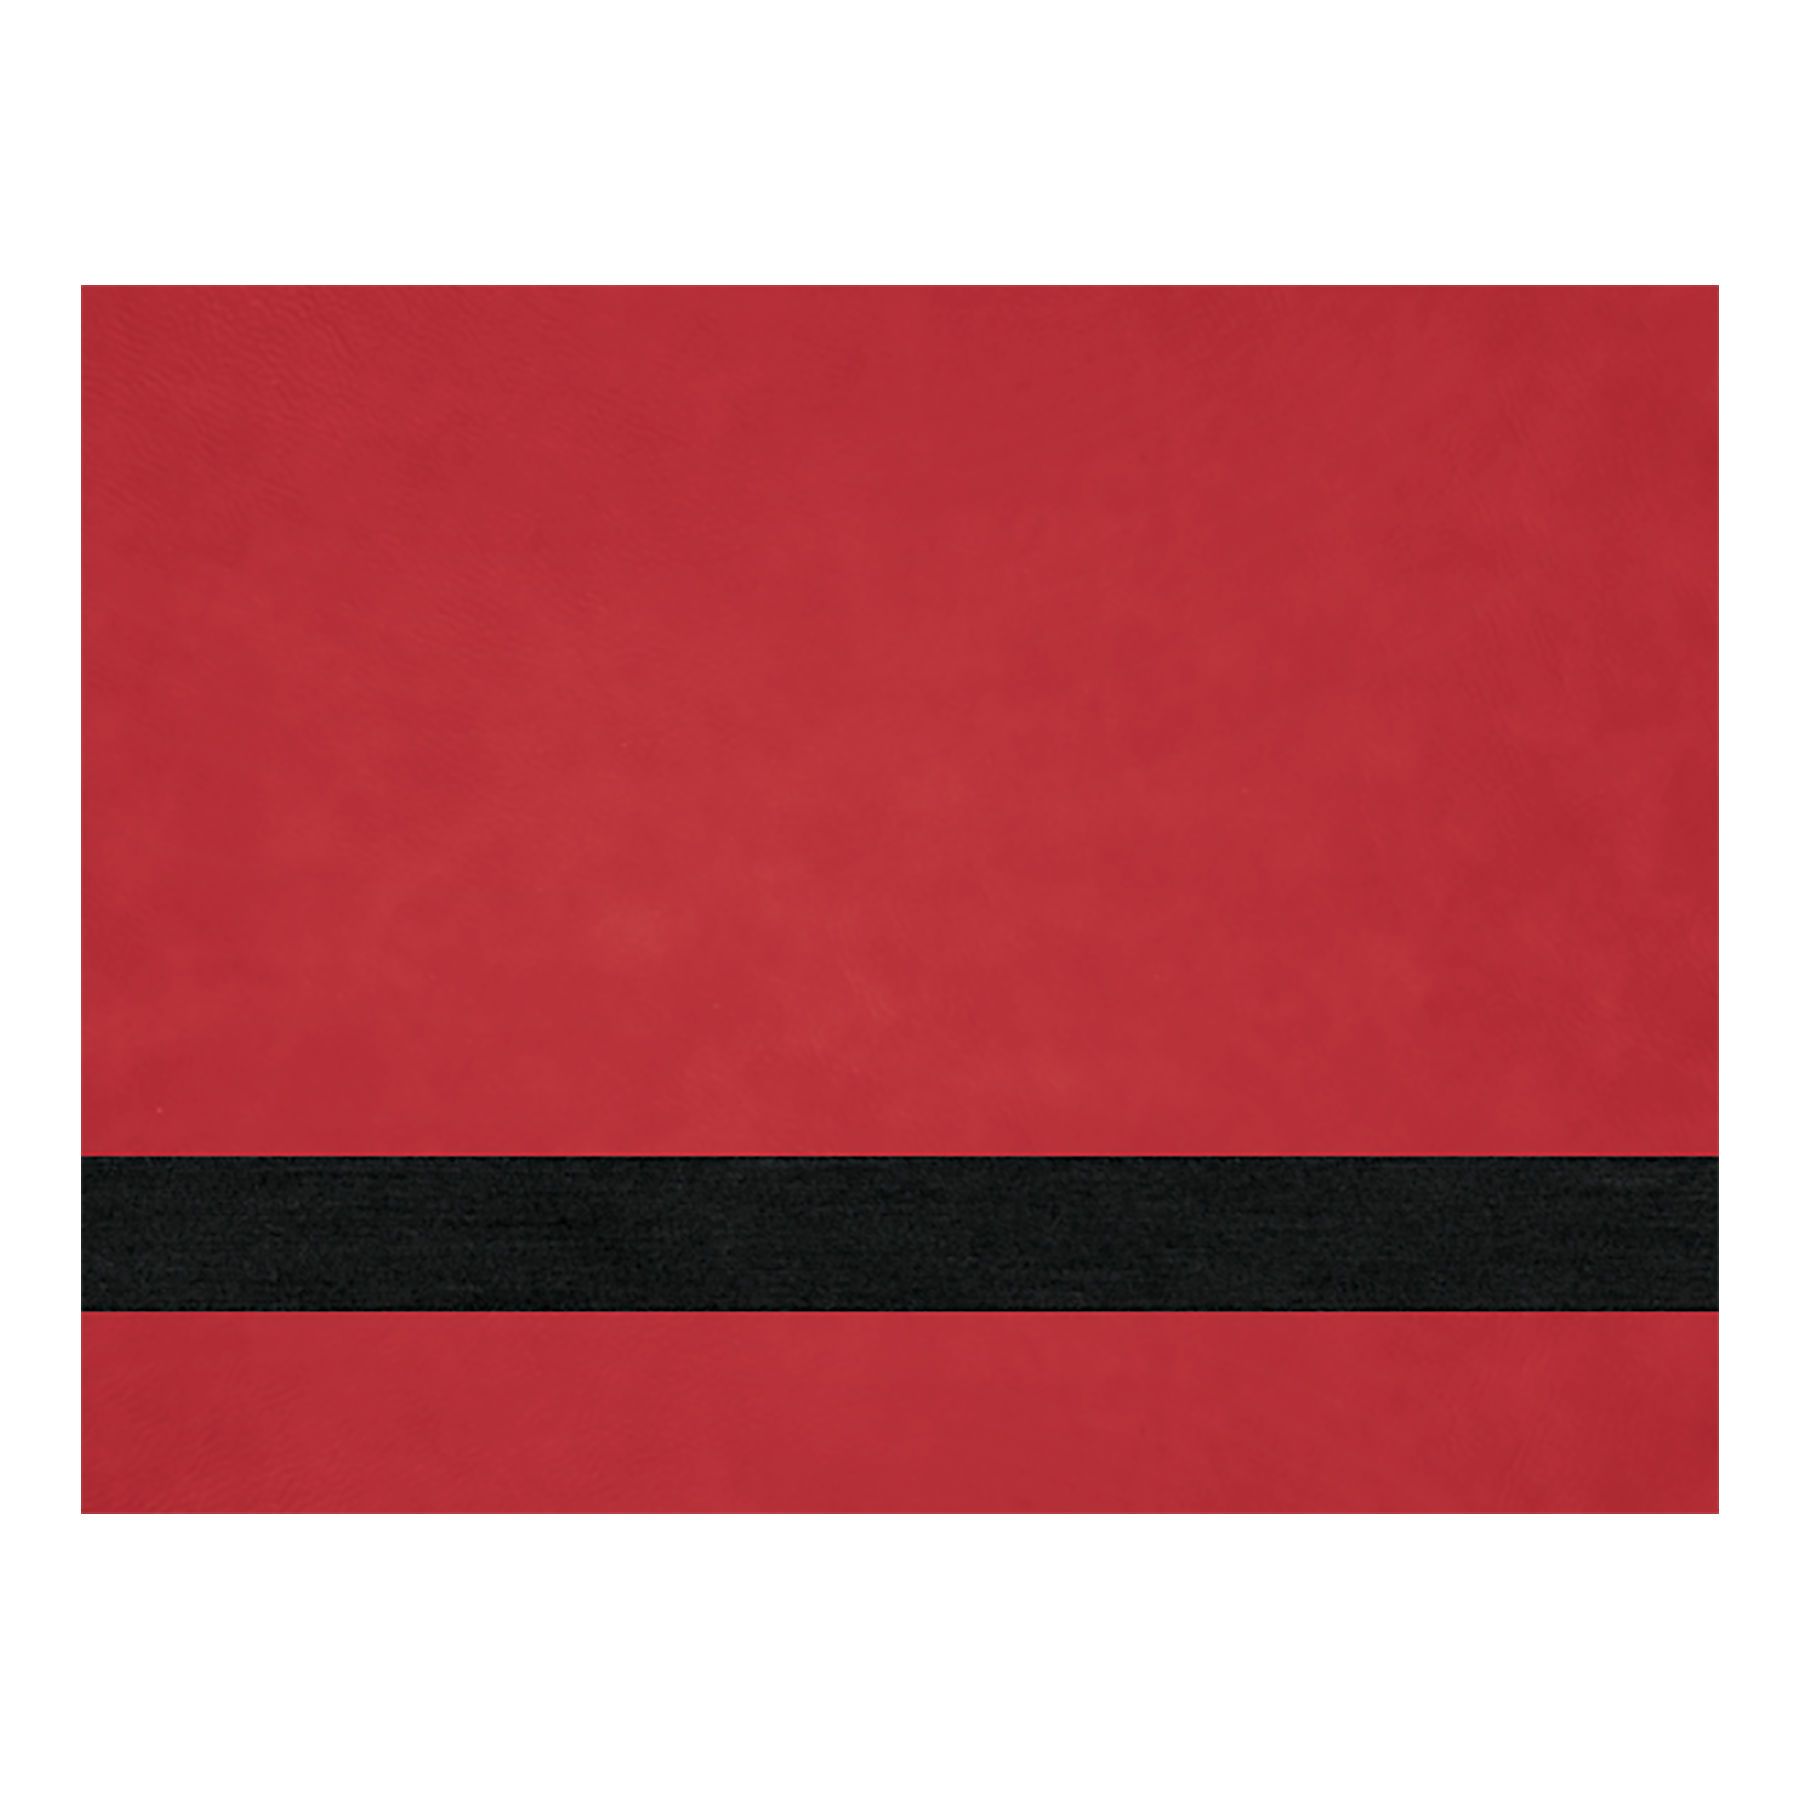 Sheet Stock w/Adhesive Backing, Laserable Leatherette, 9" x 12" Engraving Supplies Craftworks NW Red/Black 